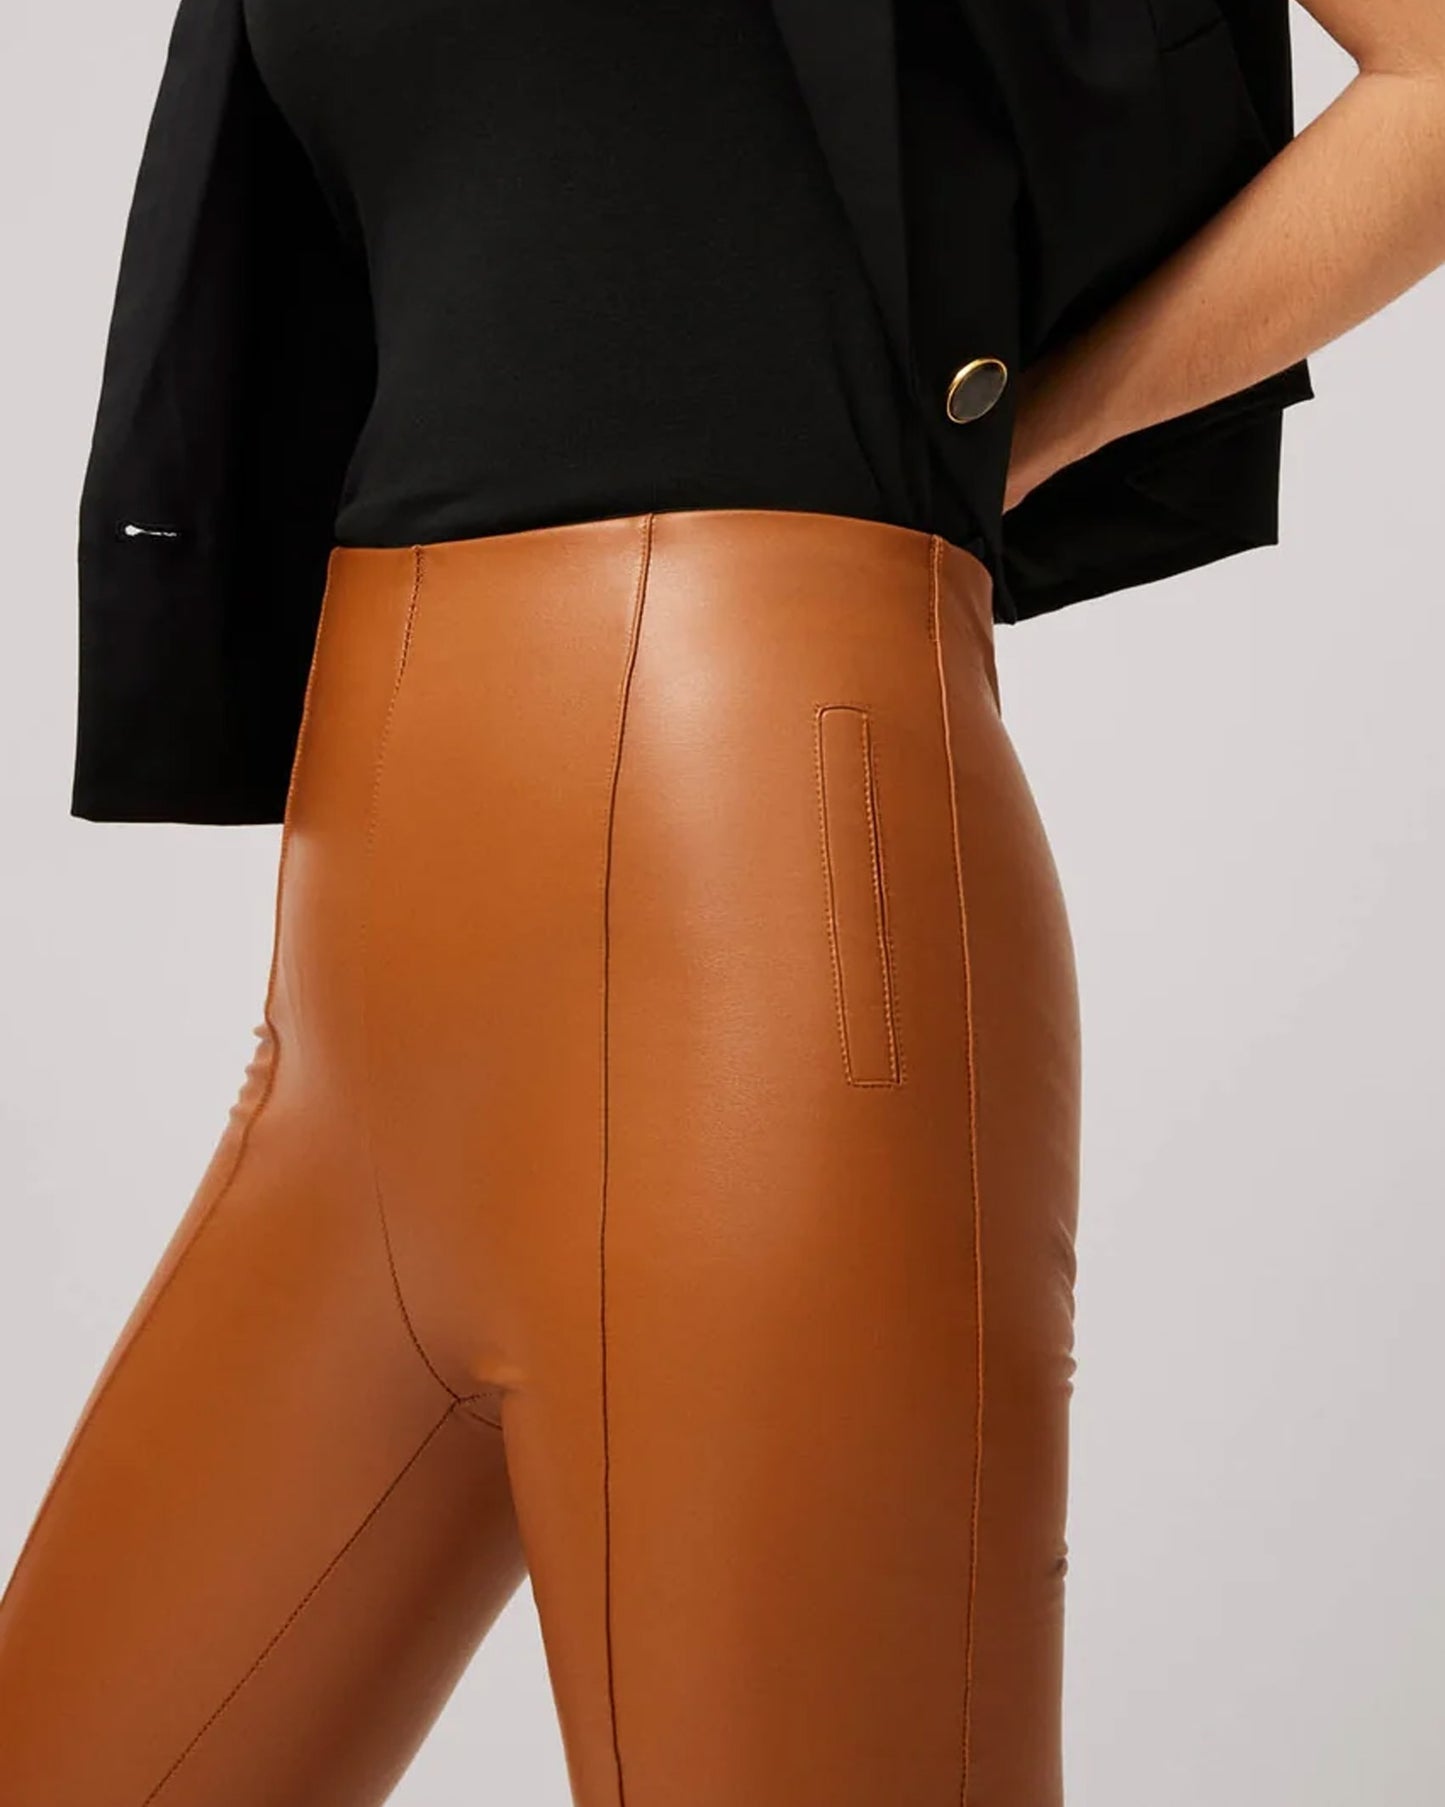 Ysabel Mora 70295 Faux Leather Slit Leggings - Tight fit faux leather thermal camel coloured leggings with a warm plush fleece lining, faux side pocket stitching, centre seam down the front.